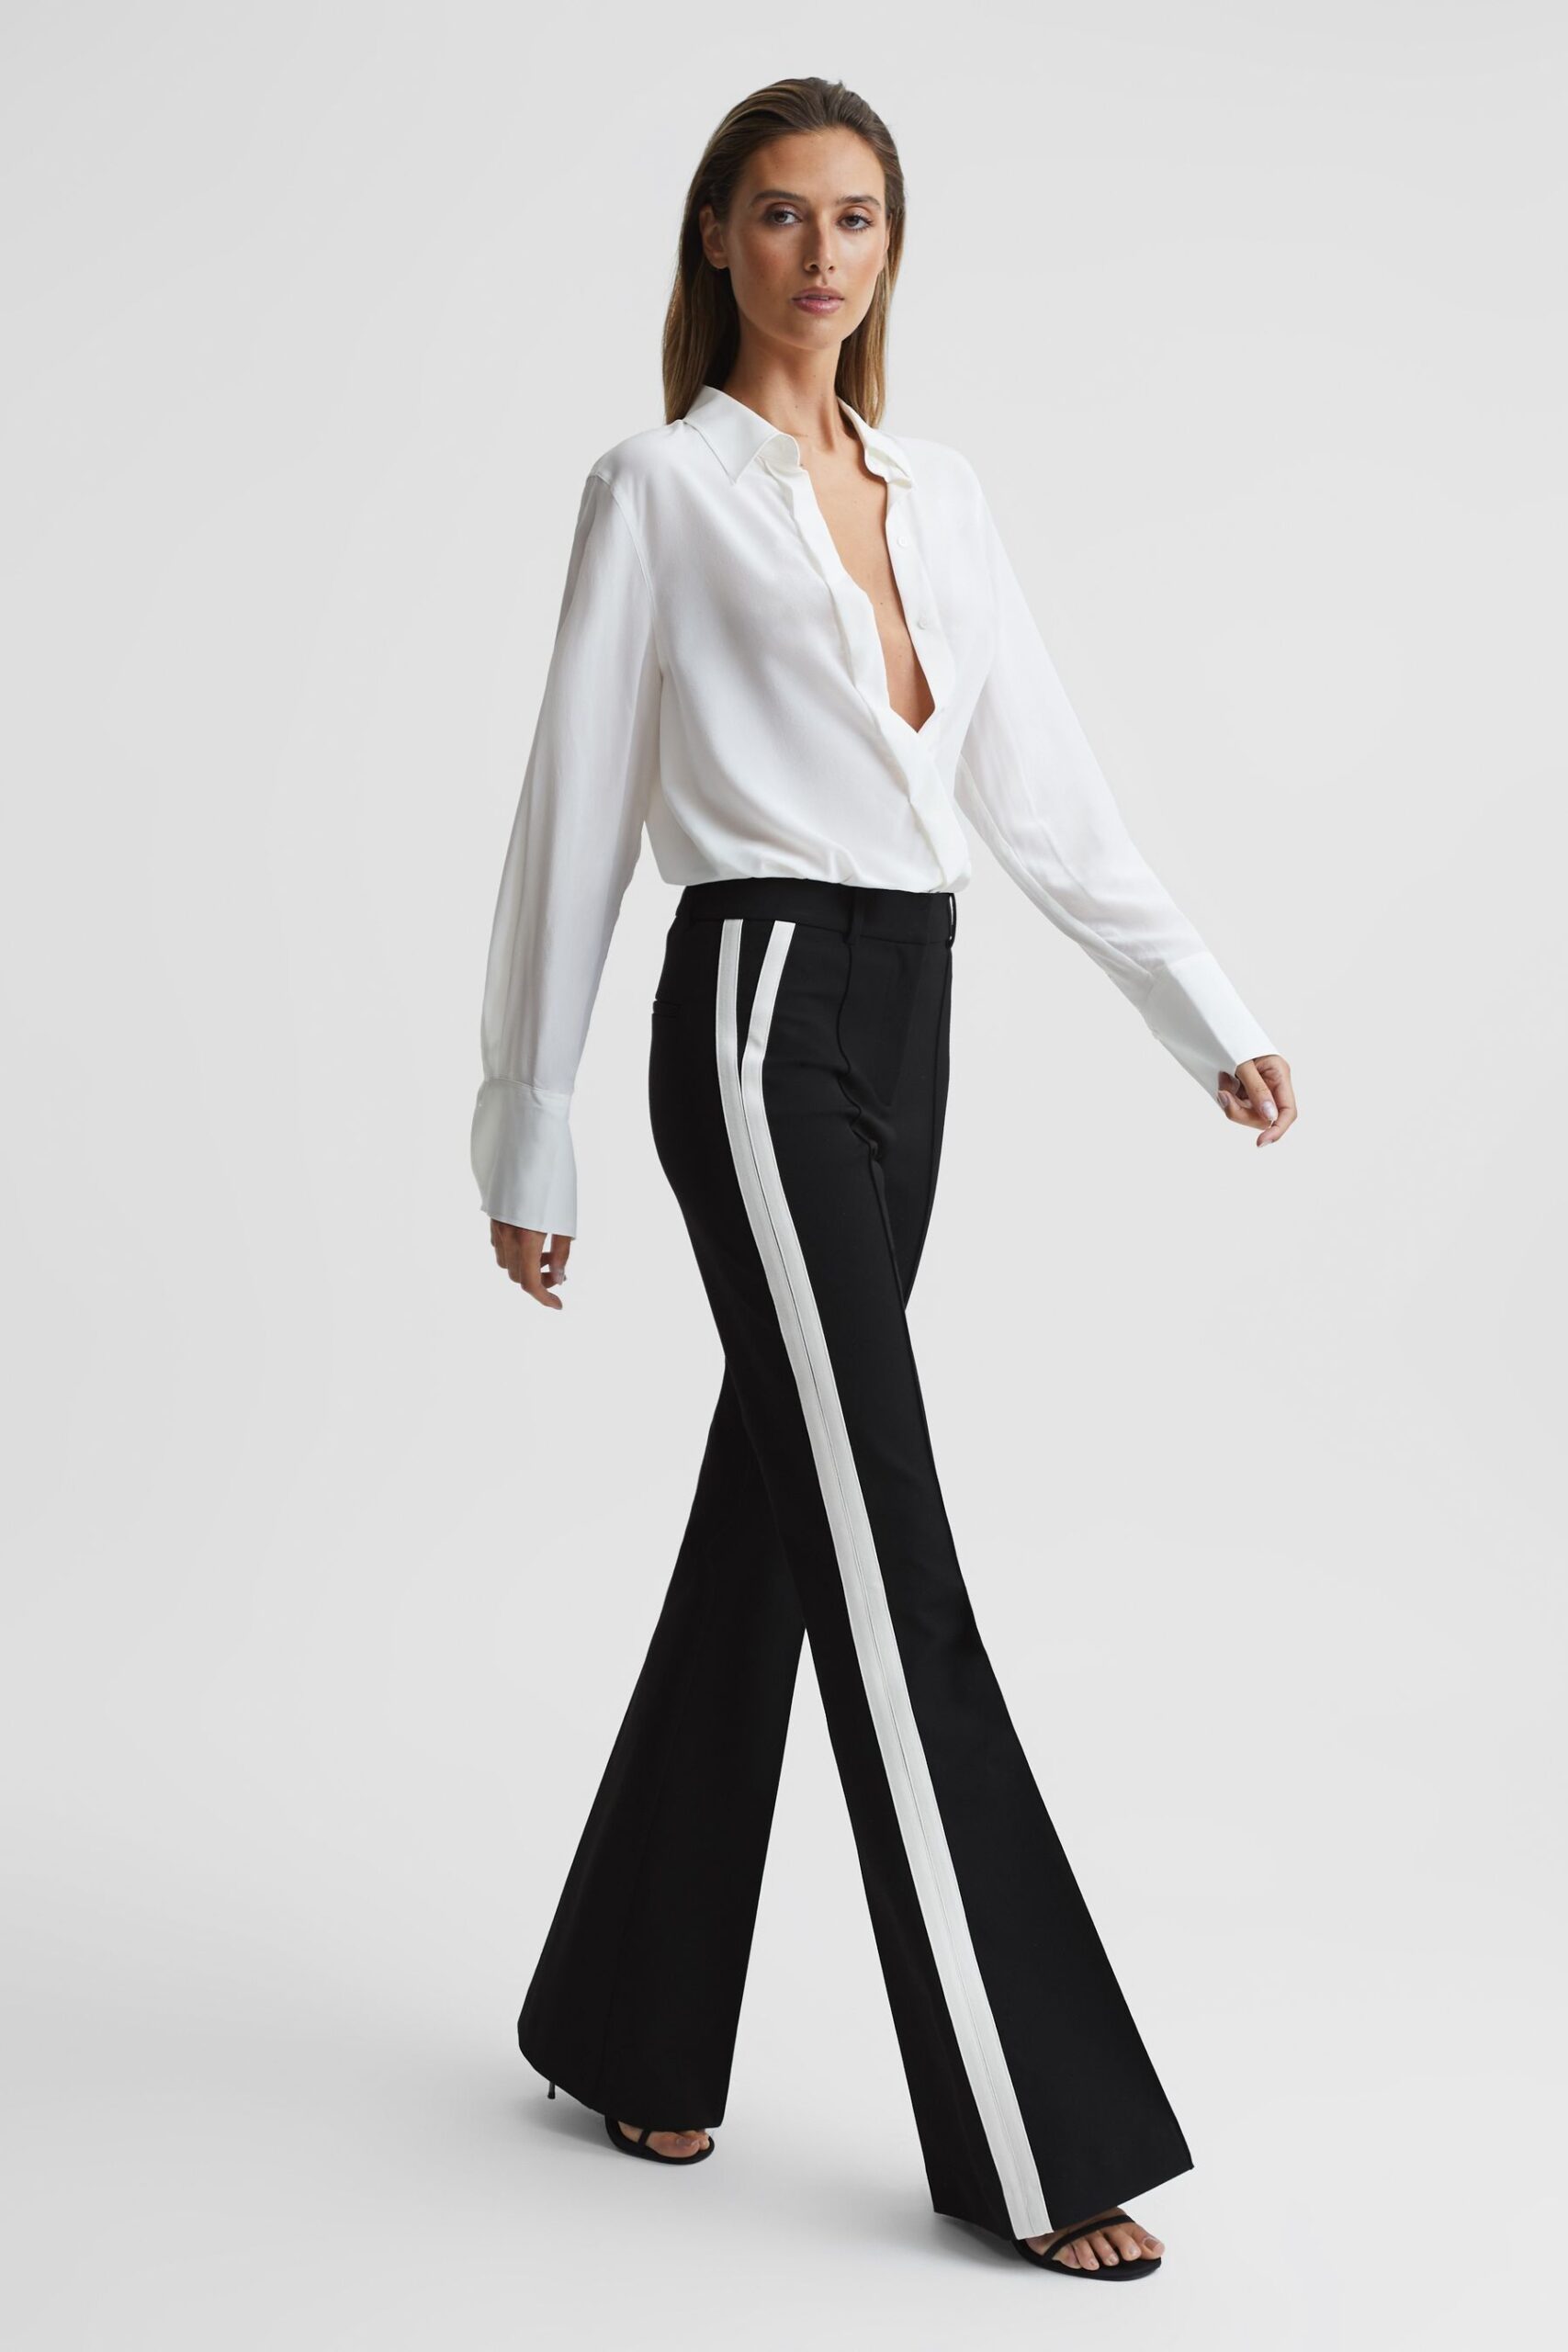 Formal Trousers: Elevate Your Look with Sophisticated Formal Trousers